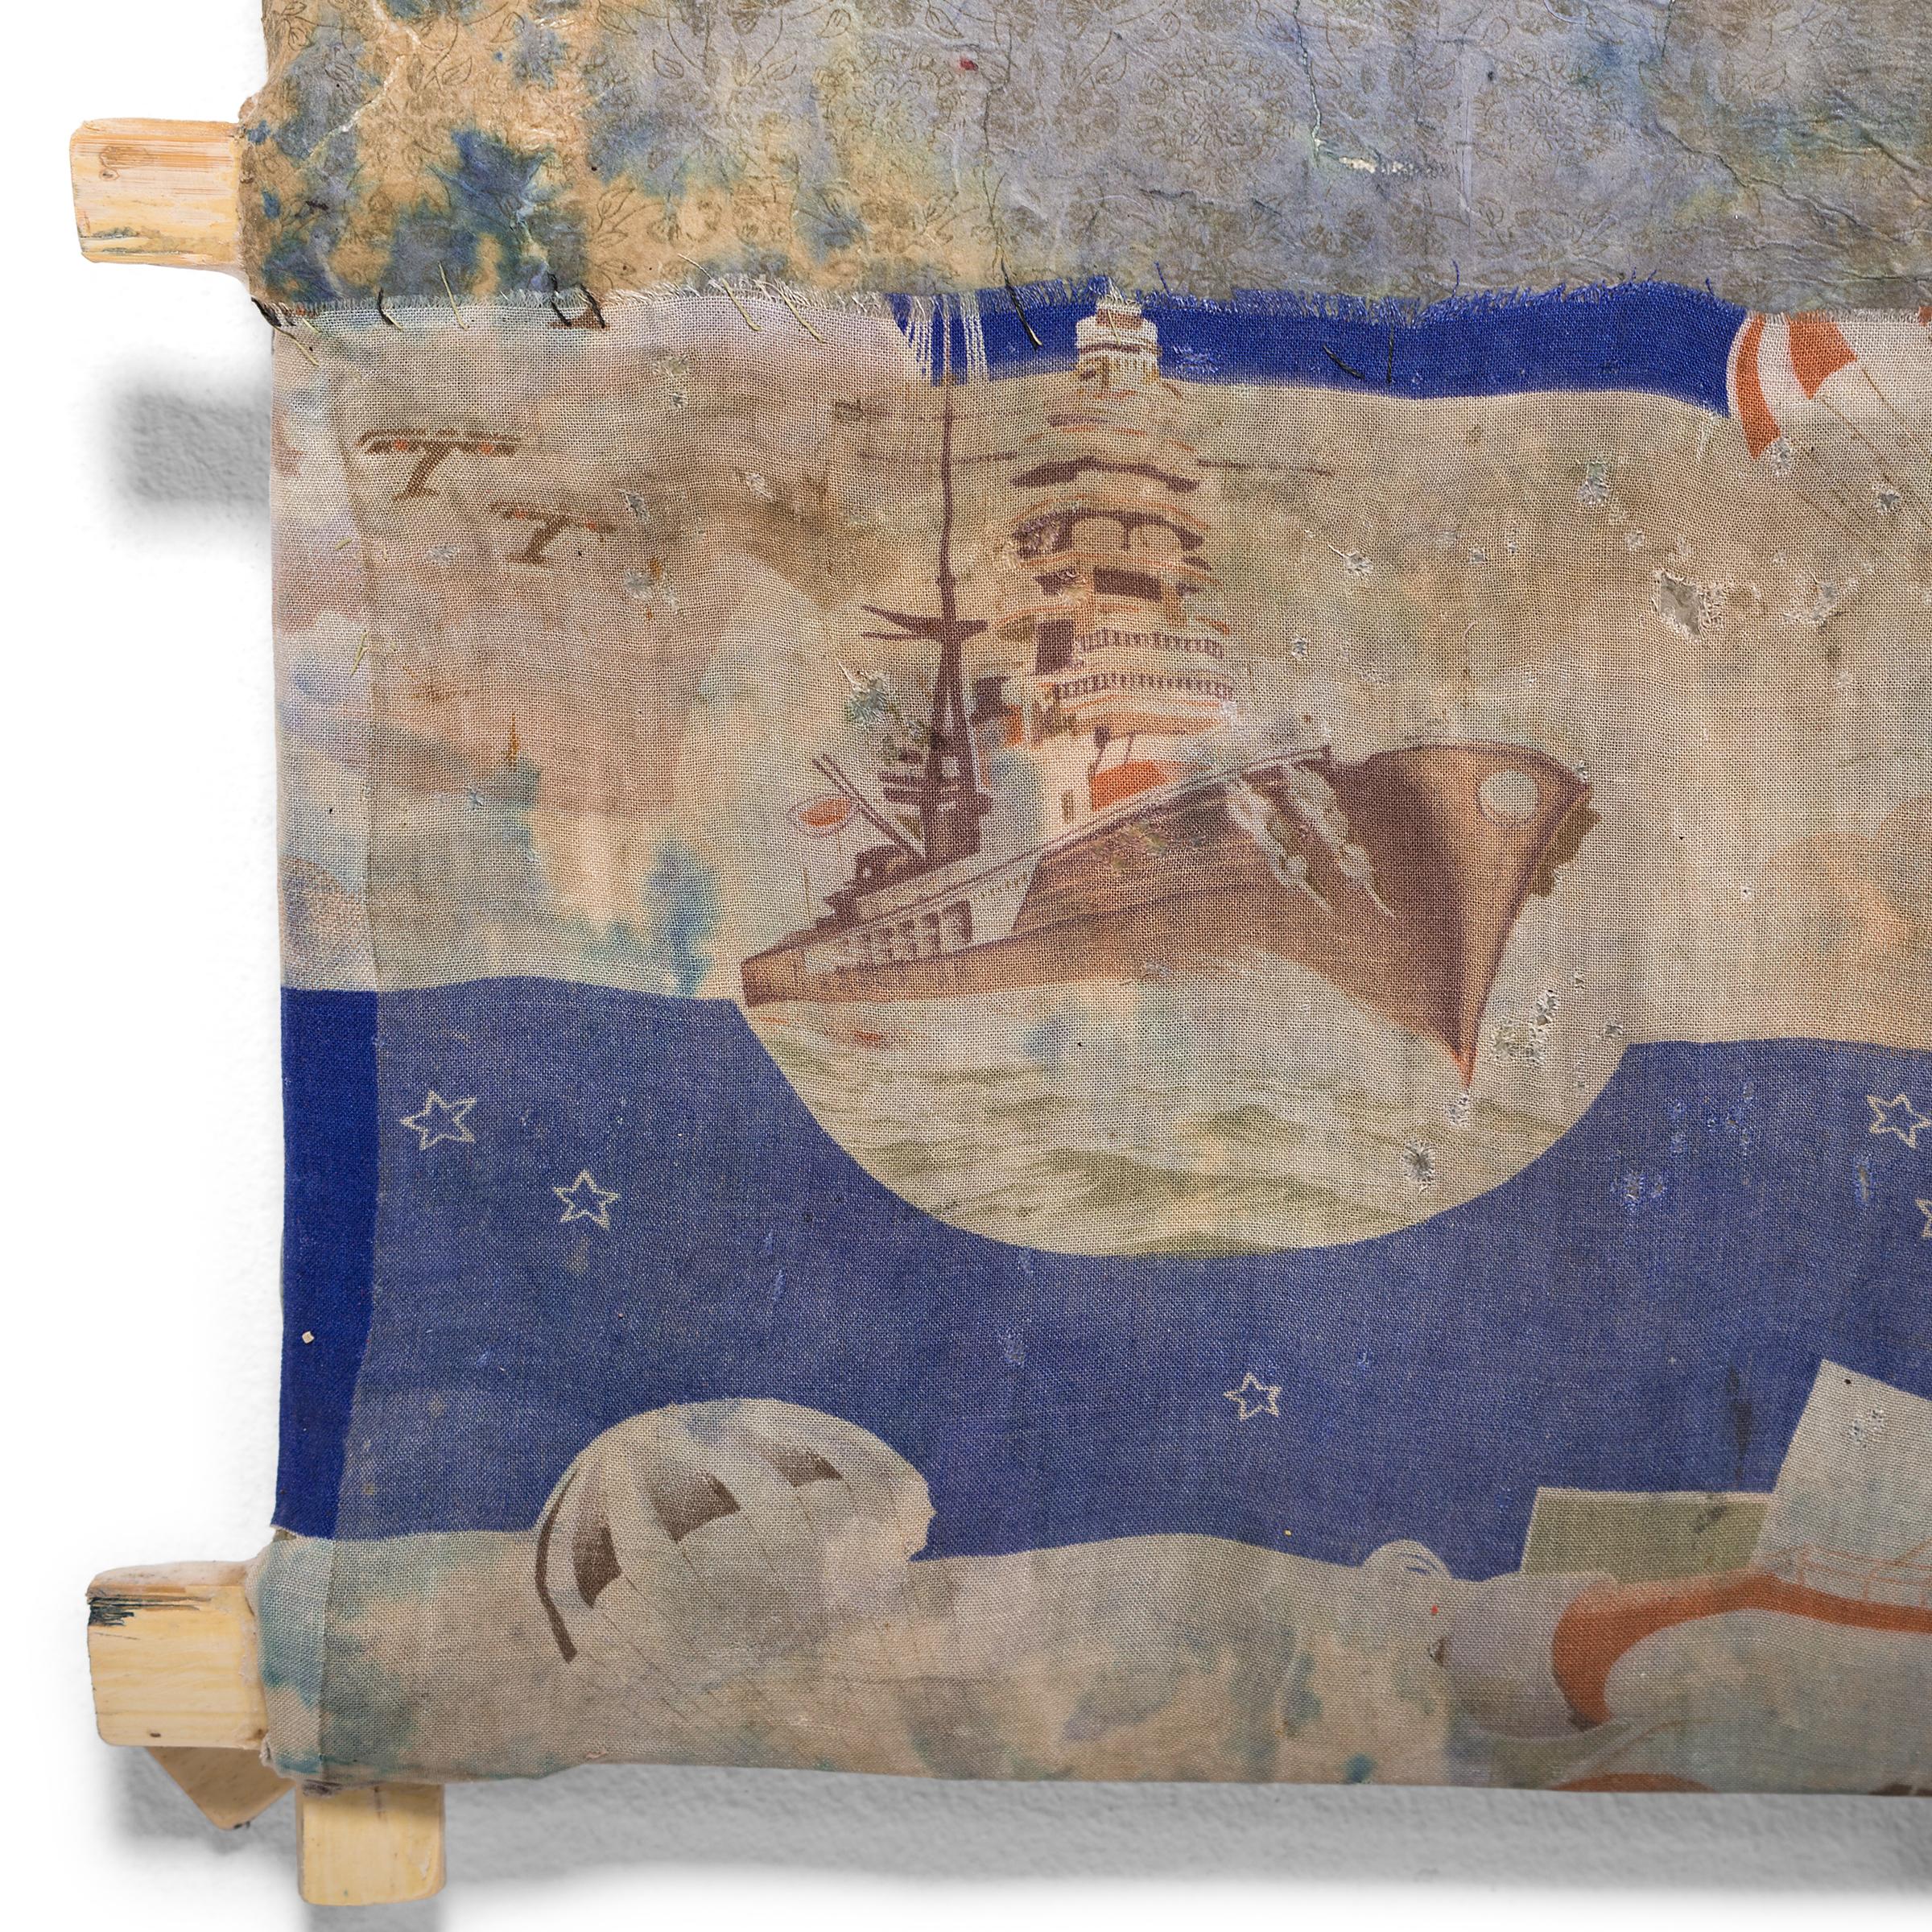 Chicago-based artist Michael Thompson creates unique kites crafted from split bamboo frames covered with stretched muslin and a collage of vintage Asian ephemera—including fragments of fabric, scrolls, drawings, and books collected during his